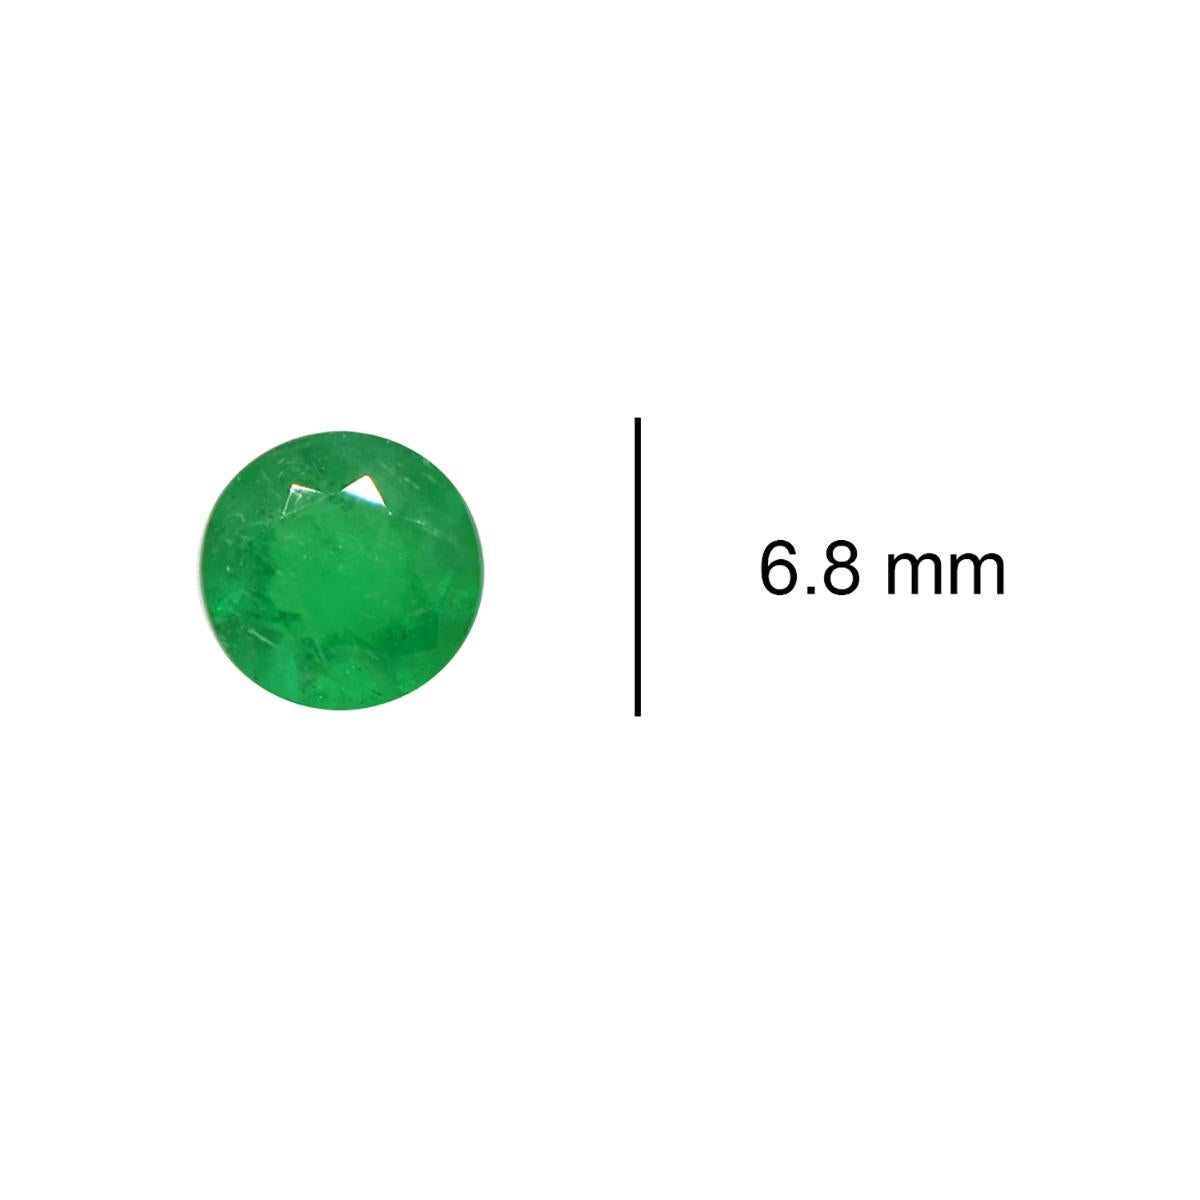 Women's or Men's 1.27 Carats Loose Round Cut Emerald from Colombia Genuine Green Gemstone For Sale